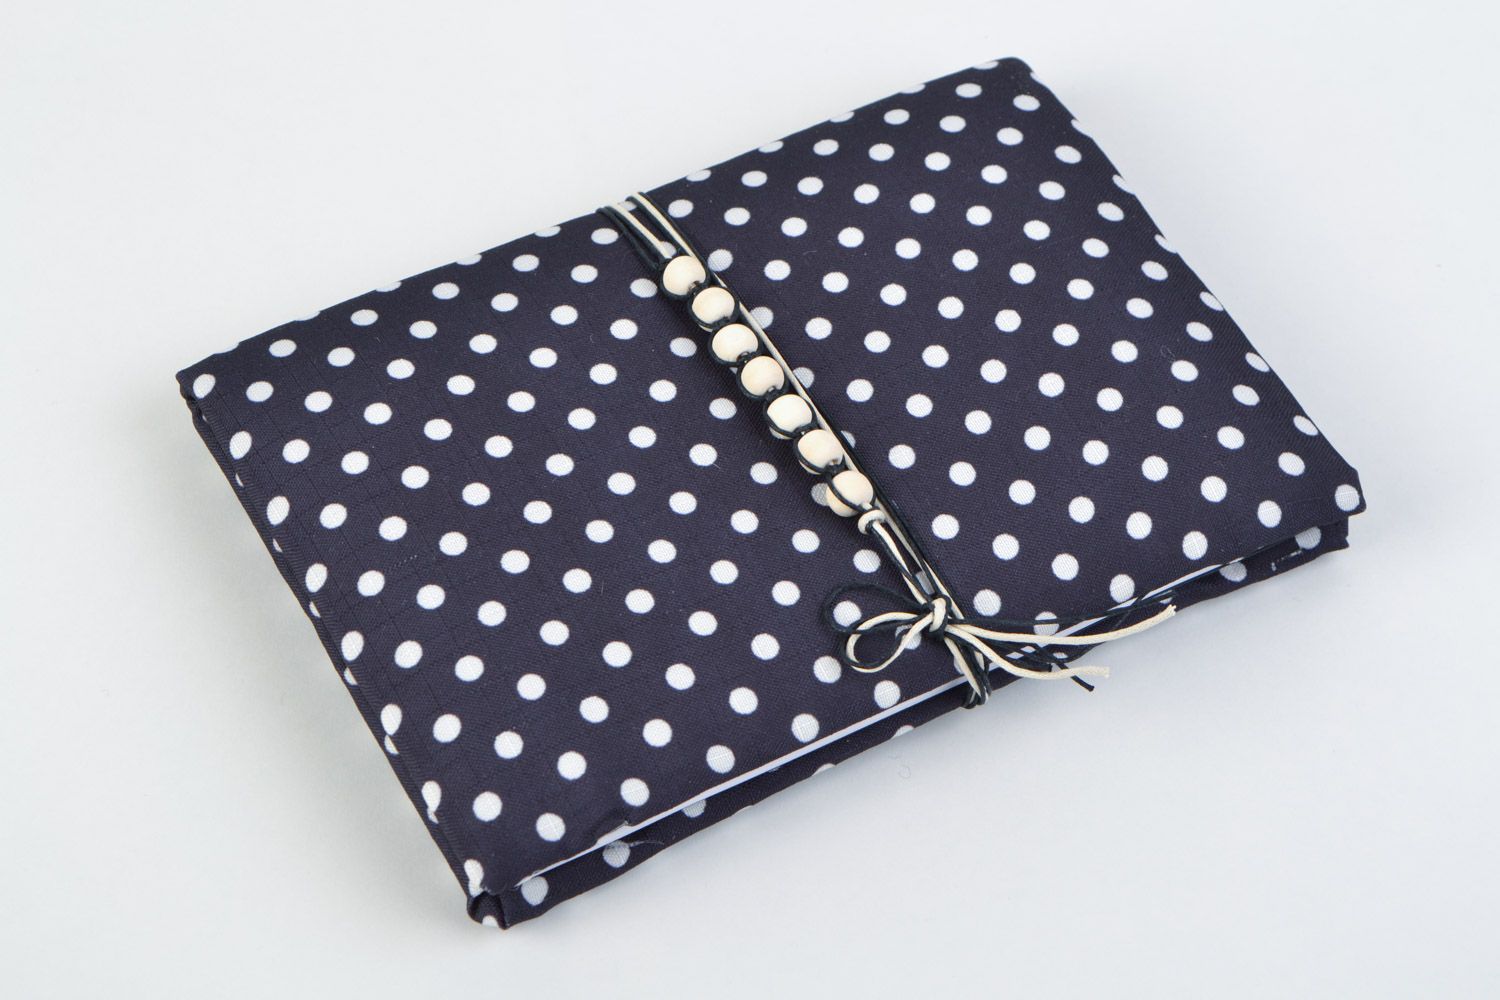 Handmade notebook with black and white polka dot cover and ties for 60 pages photo 1